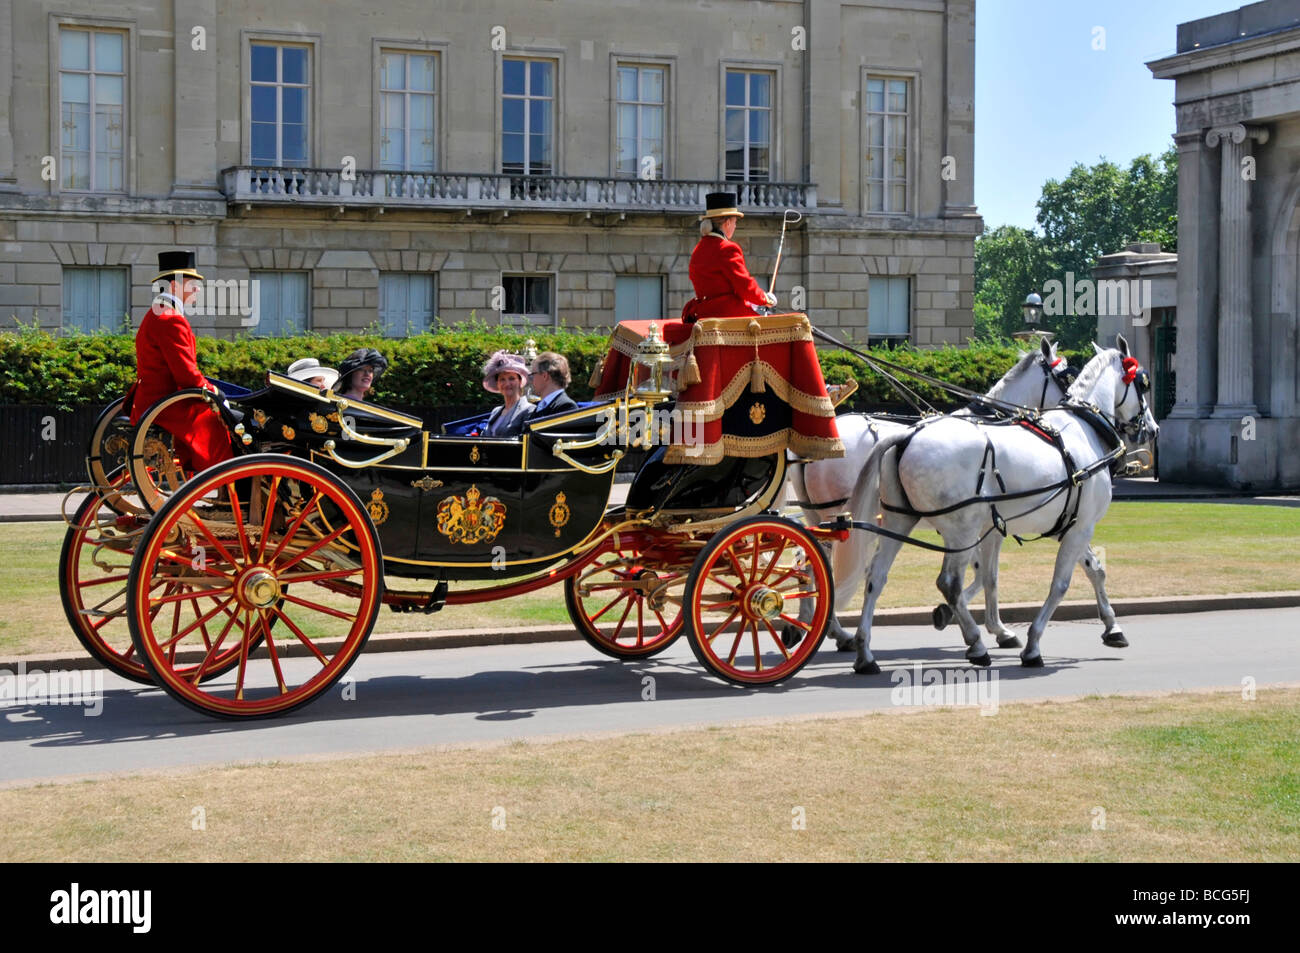 Sunny summer day in Hyde Park London historical horse drawn open Landau carriage with roof folded down two coachmen & passengers England UK Stock Photo